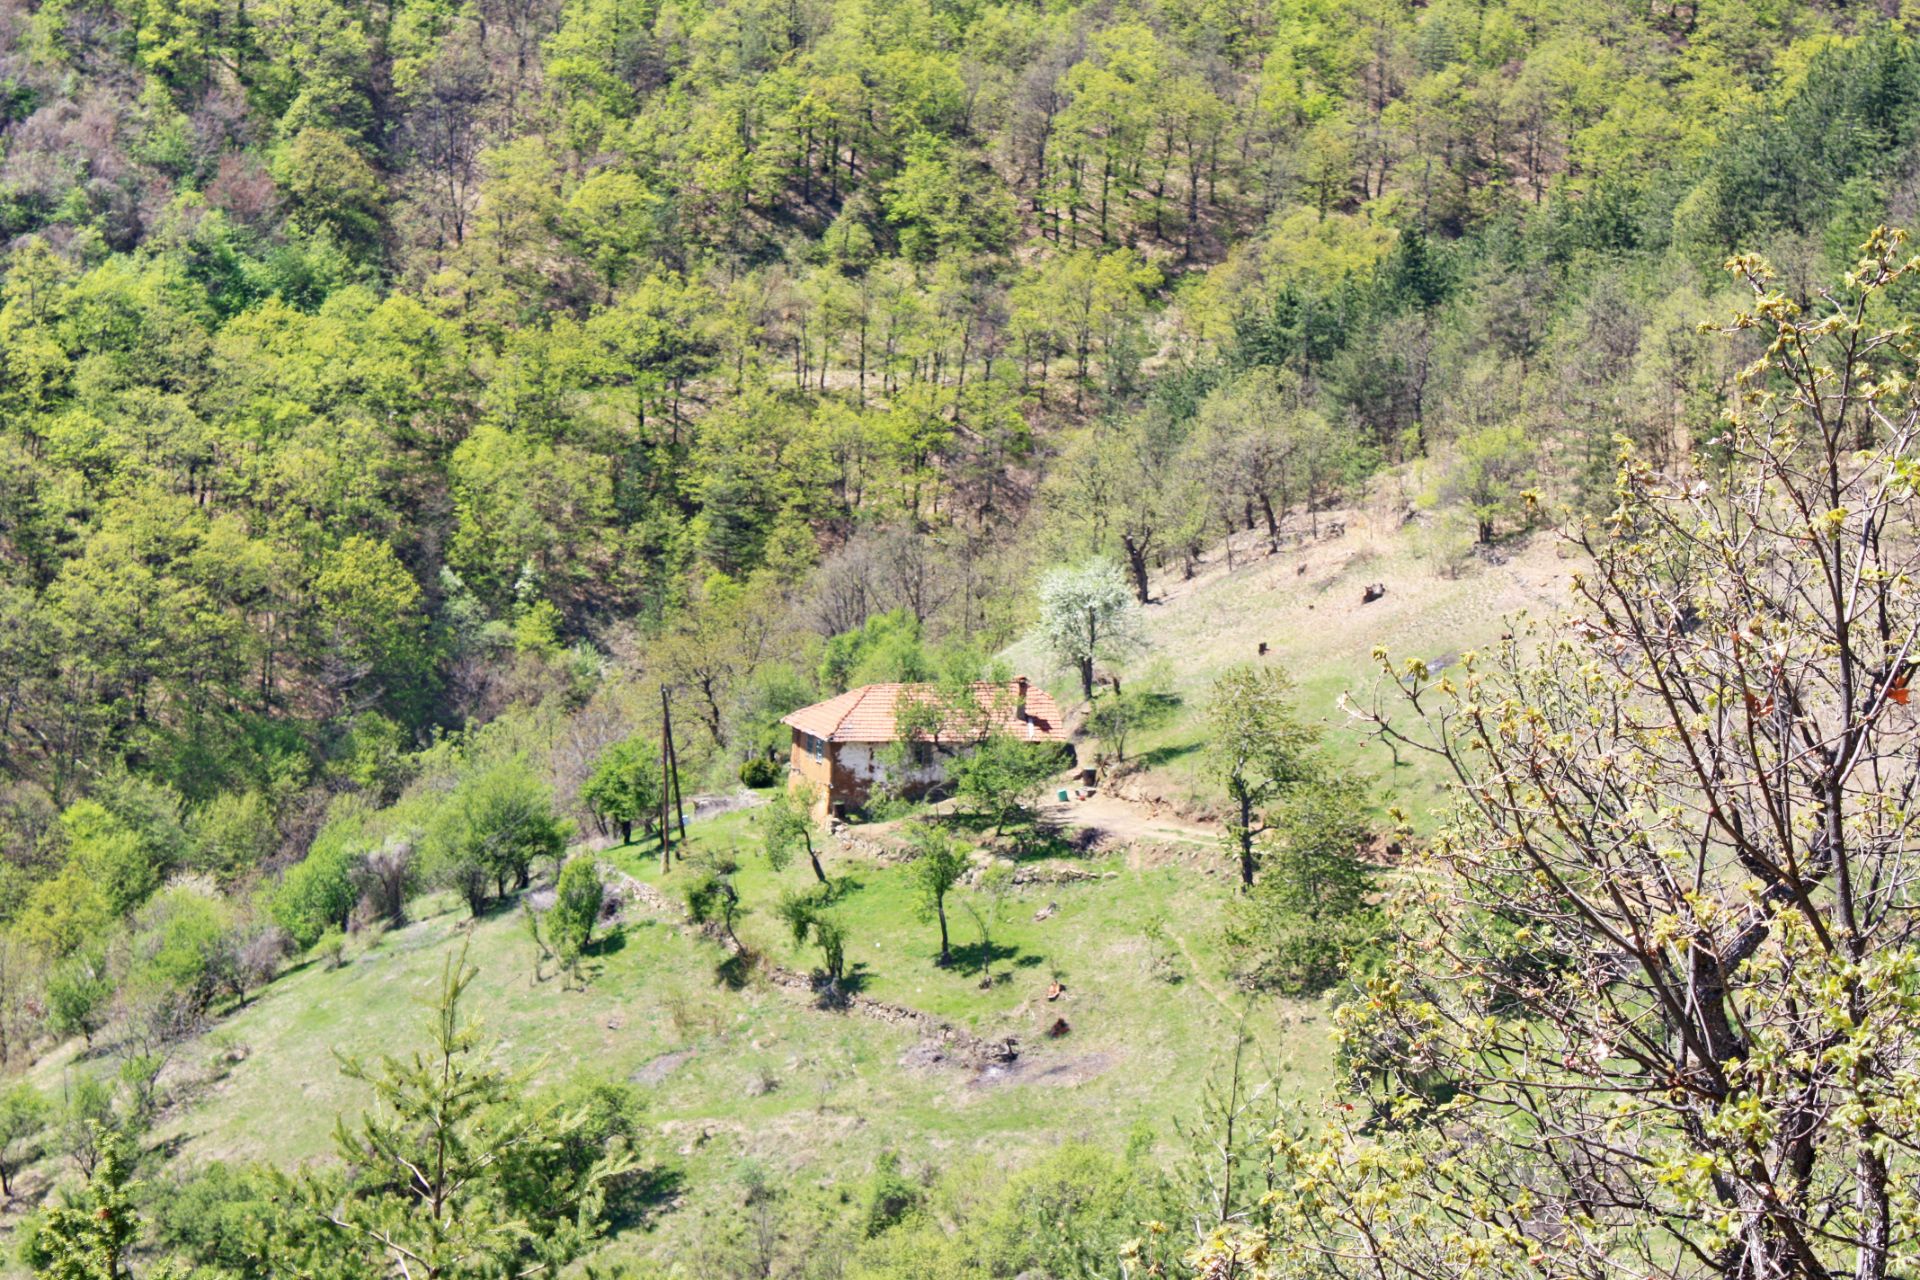 7.5 Acre Ranch in Bulgaria 1h from Sofia - Image 11 of 32